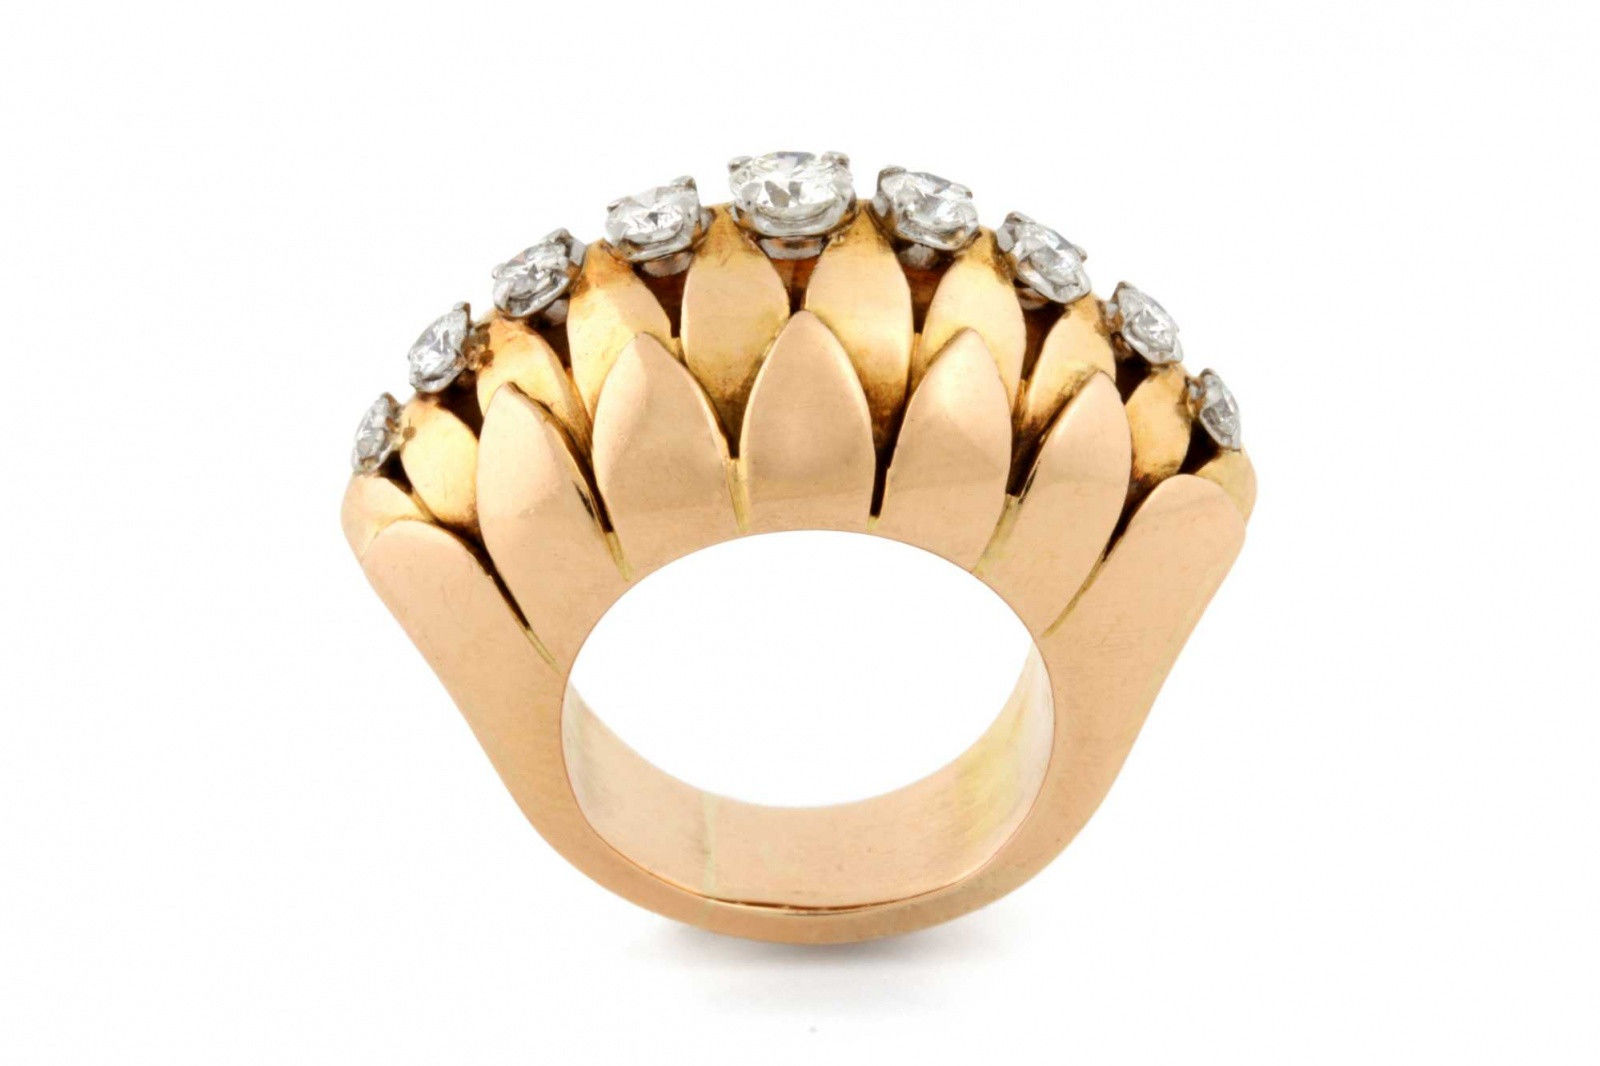 18k yellow gold and diamond Laurelring by the famous house of Van Cleef & Arpels